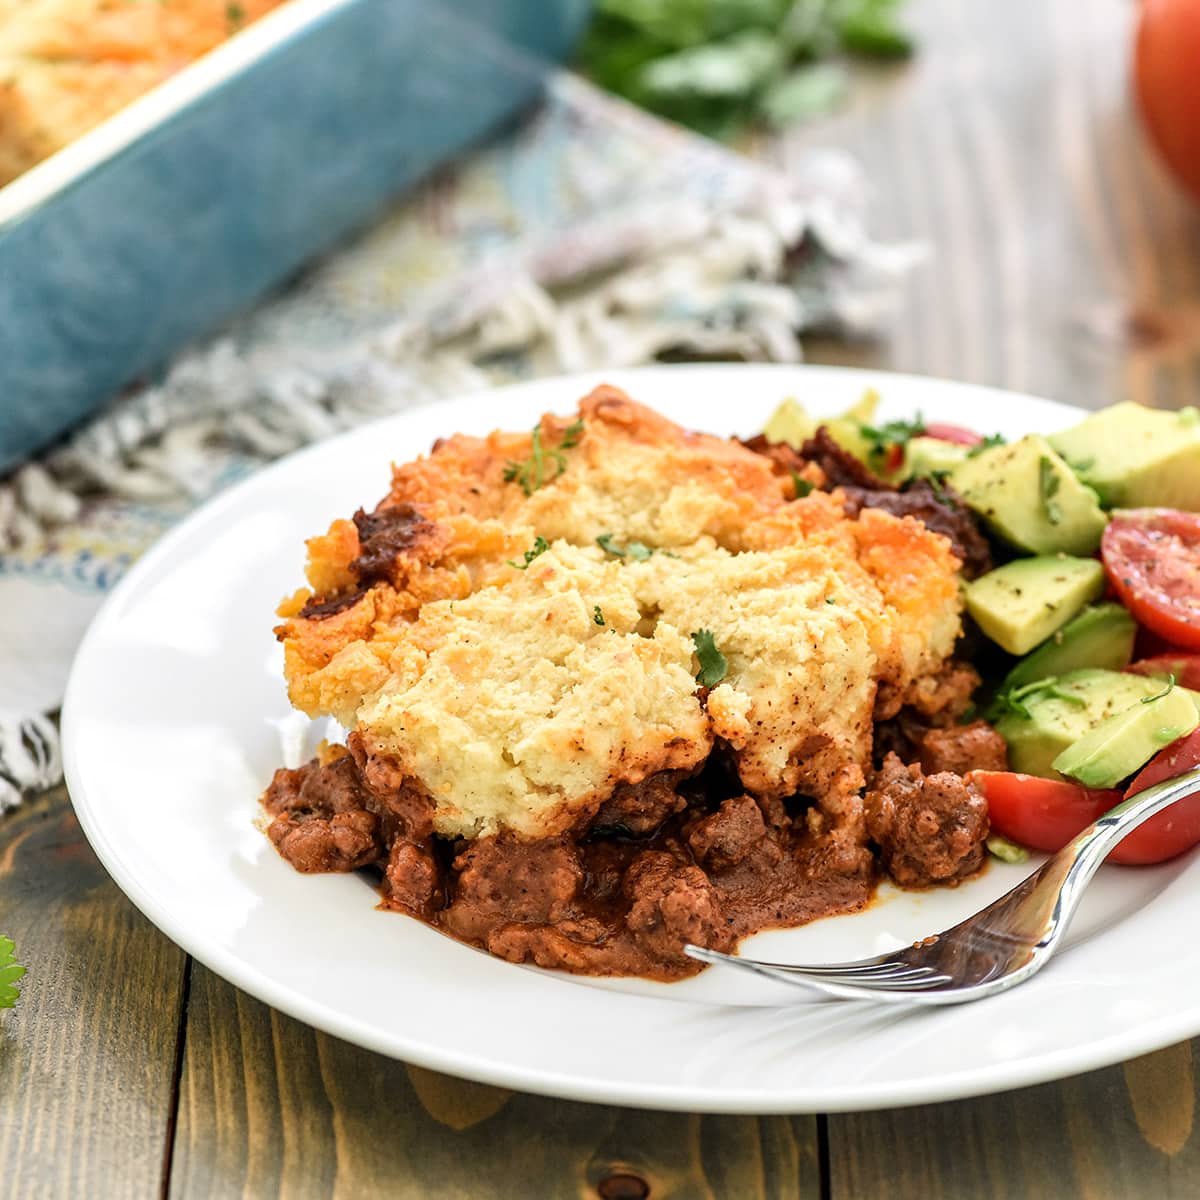 Tamale Pie recipe served on a plate with avocado tomato salad on the side.